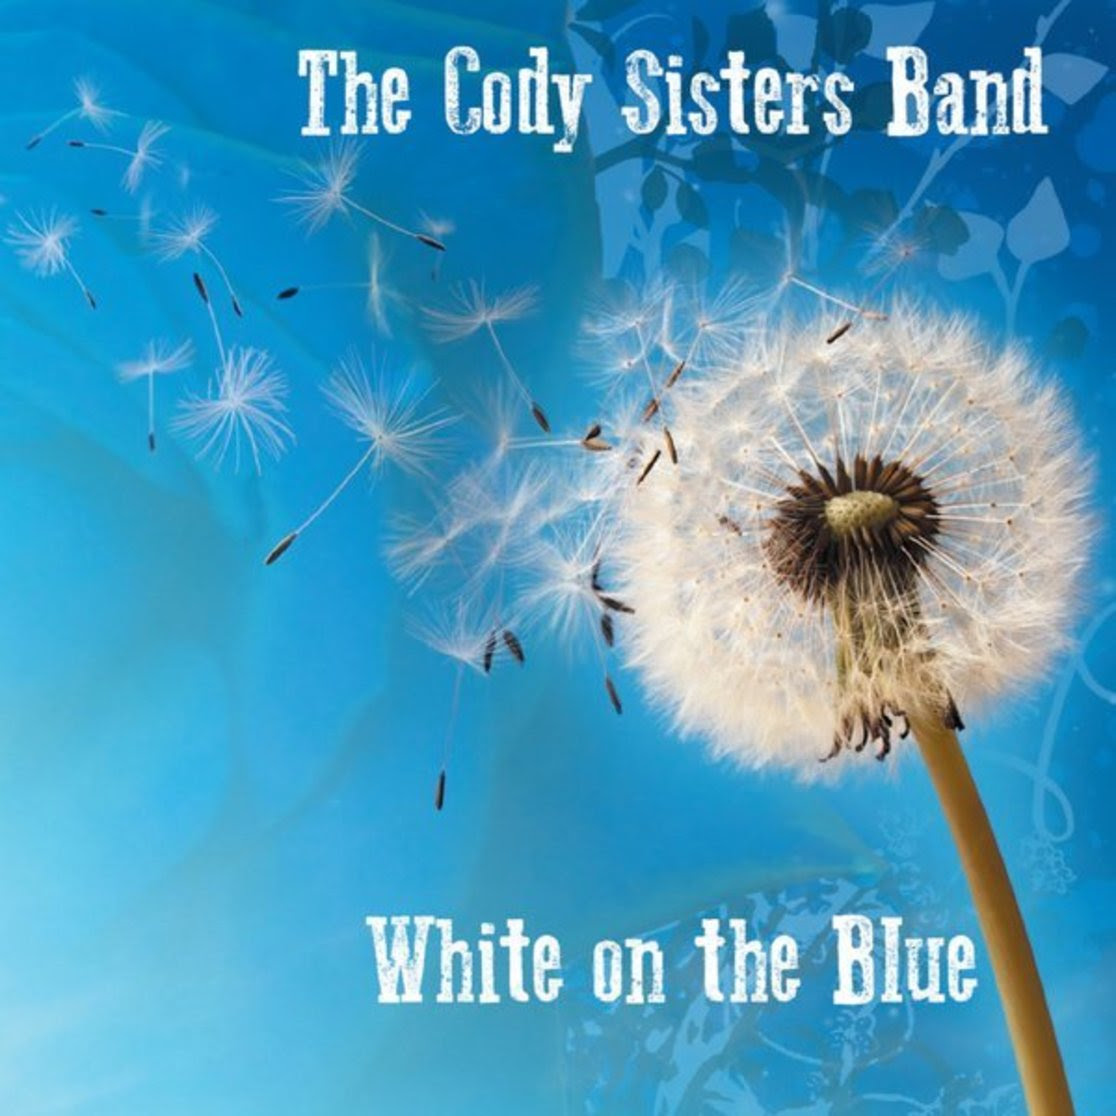 THE CODY SISTERS BAND RELEASE SOPHOMORE ALBUM,  WHITE ON THE BLUE AUGUST 31